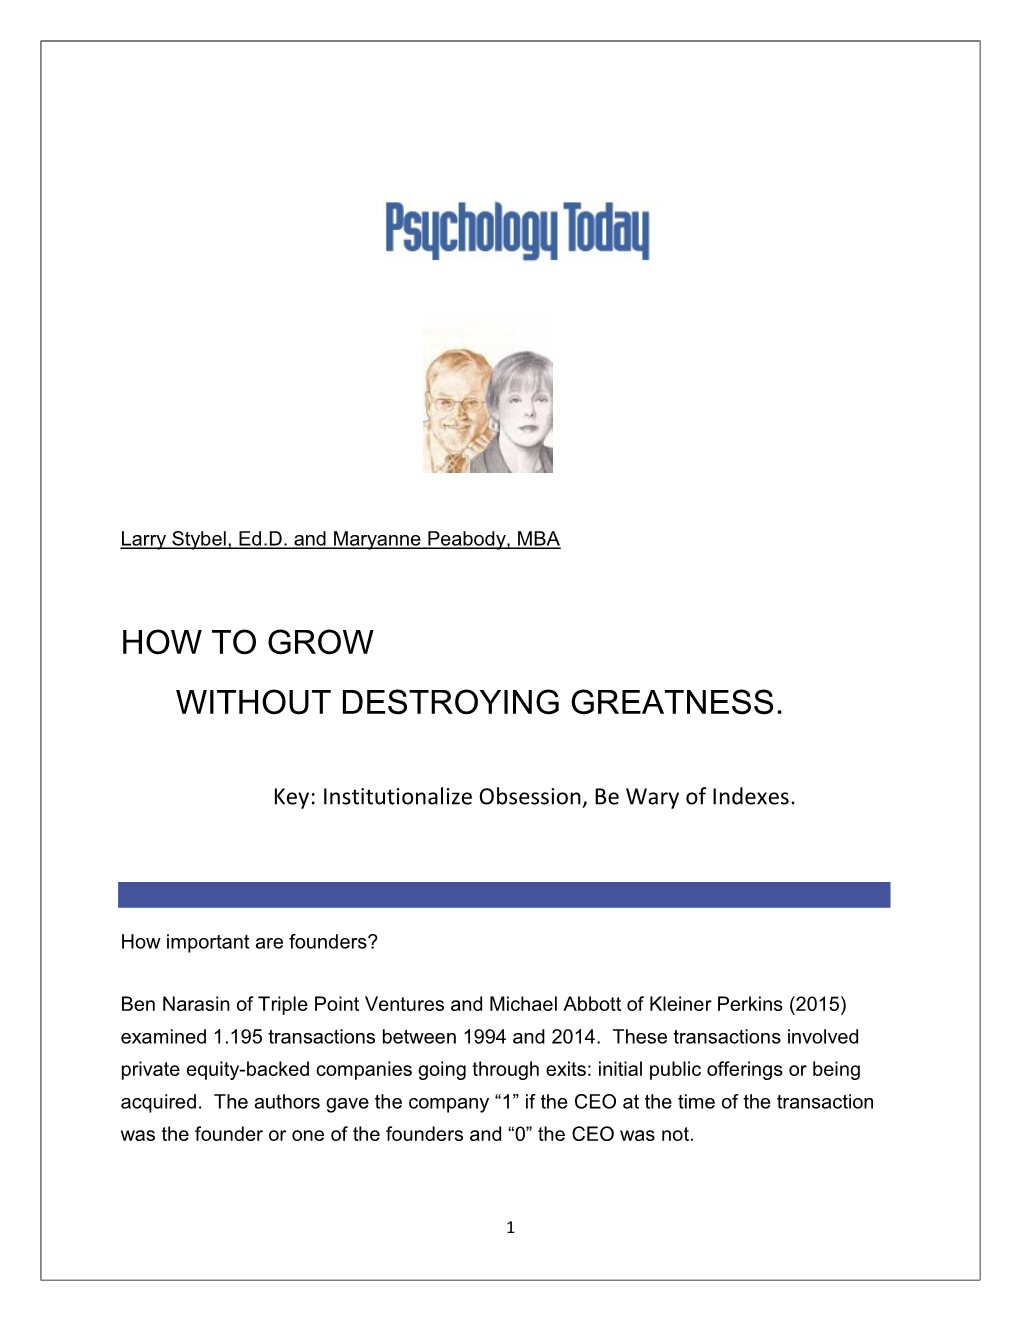 How to Grow Without Destroying Greatness